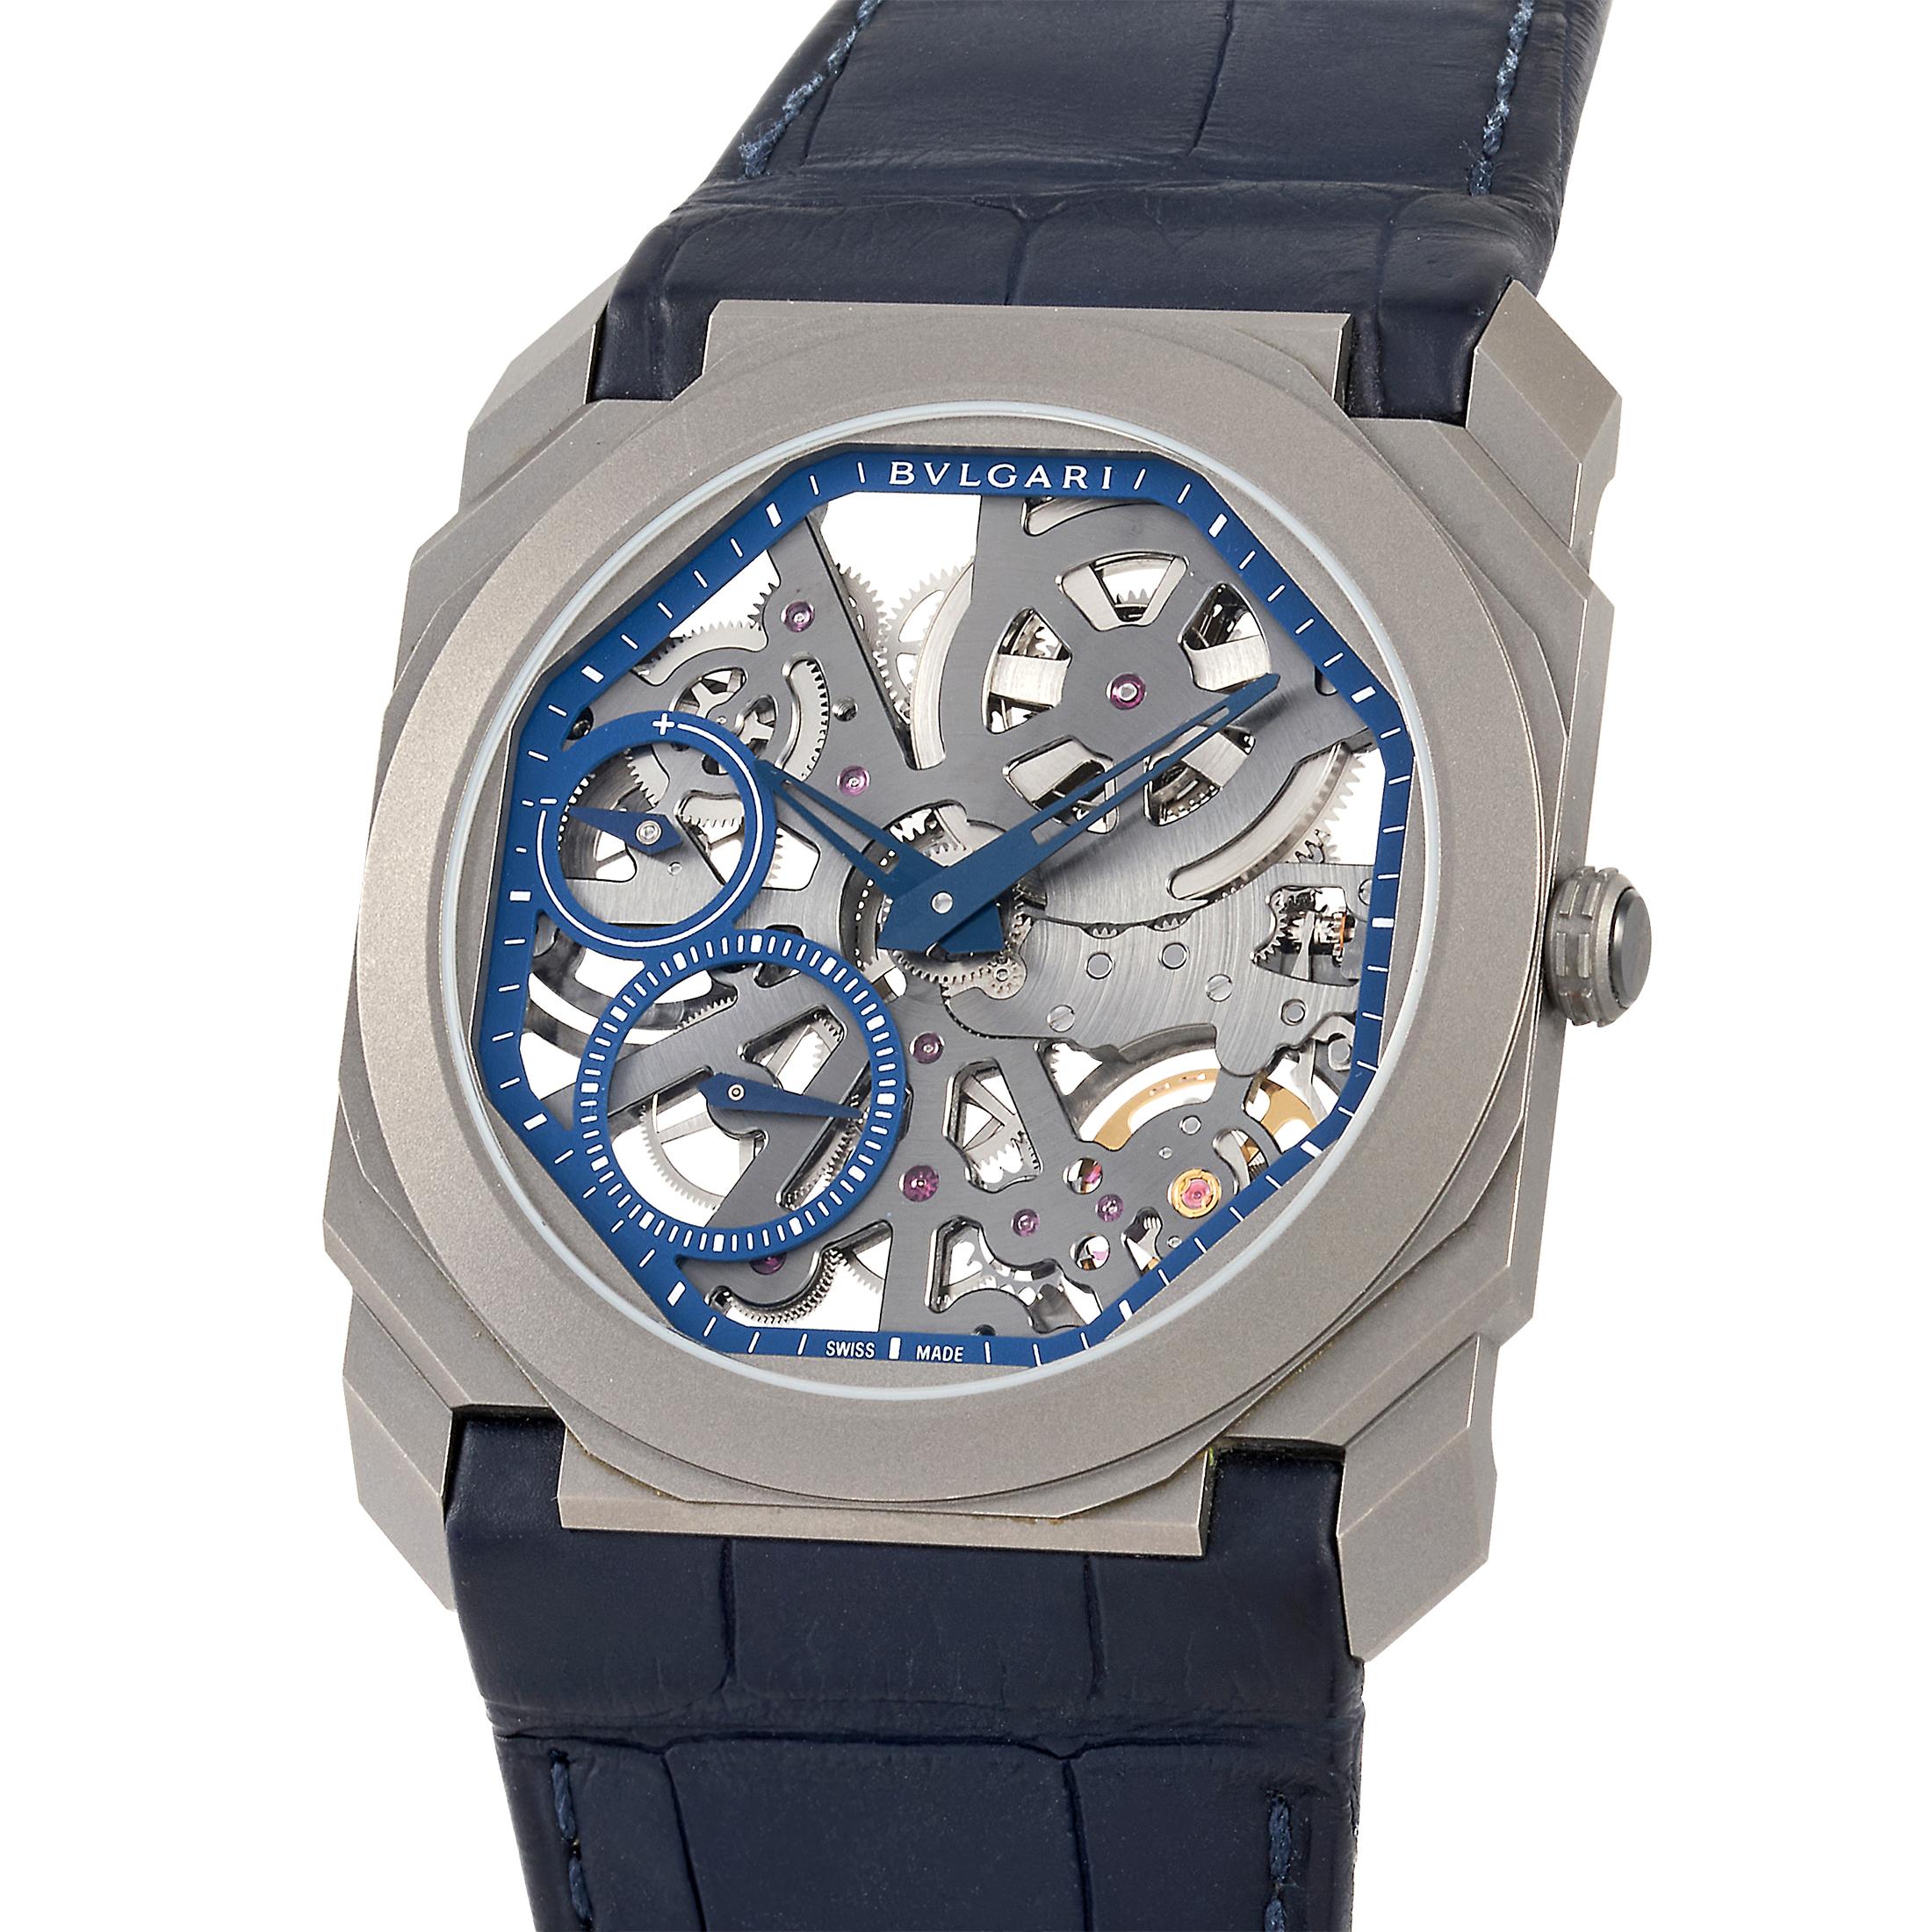 An interesting watch with an undeniable wrist presence. The Bvlgari Limited Edition Octo Finissimo Extra Thin Skeleton Watch 102941 is light, slim, versatile, and worth taking a look at. It features a sand-blasted titanium case with a sapphire front